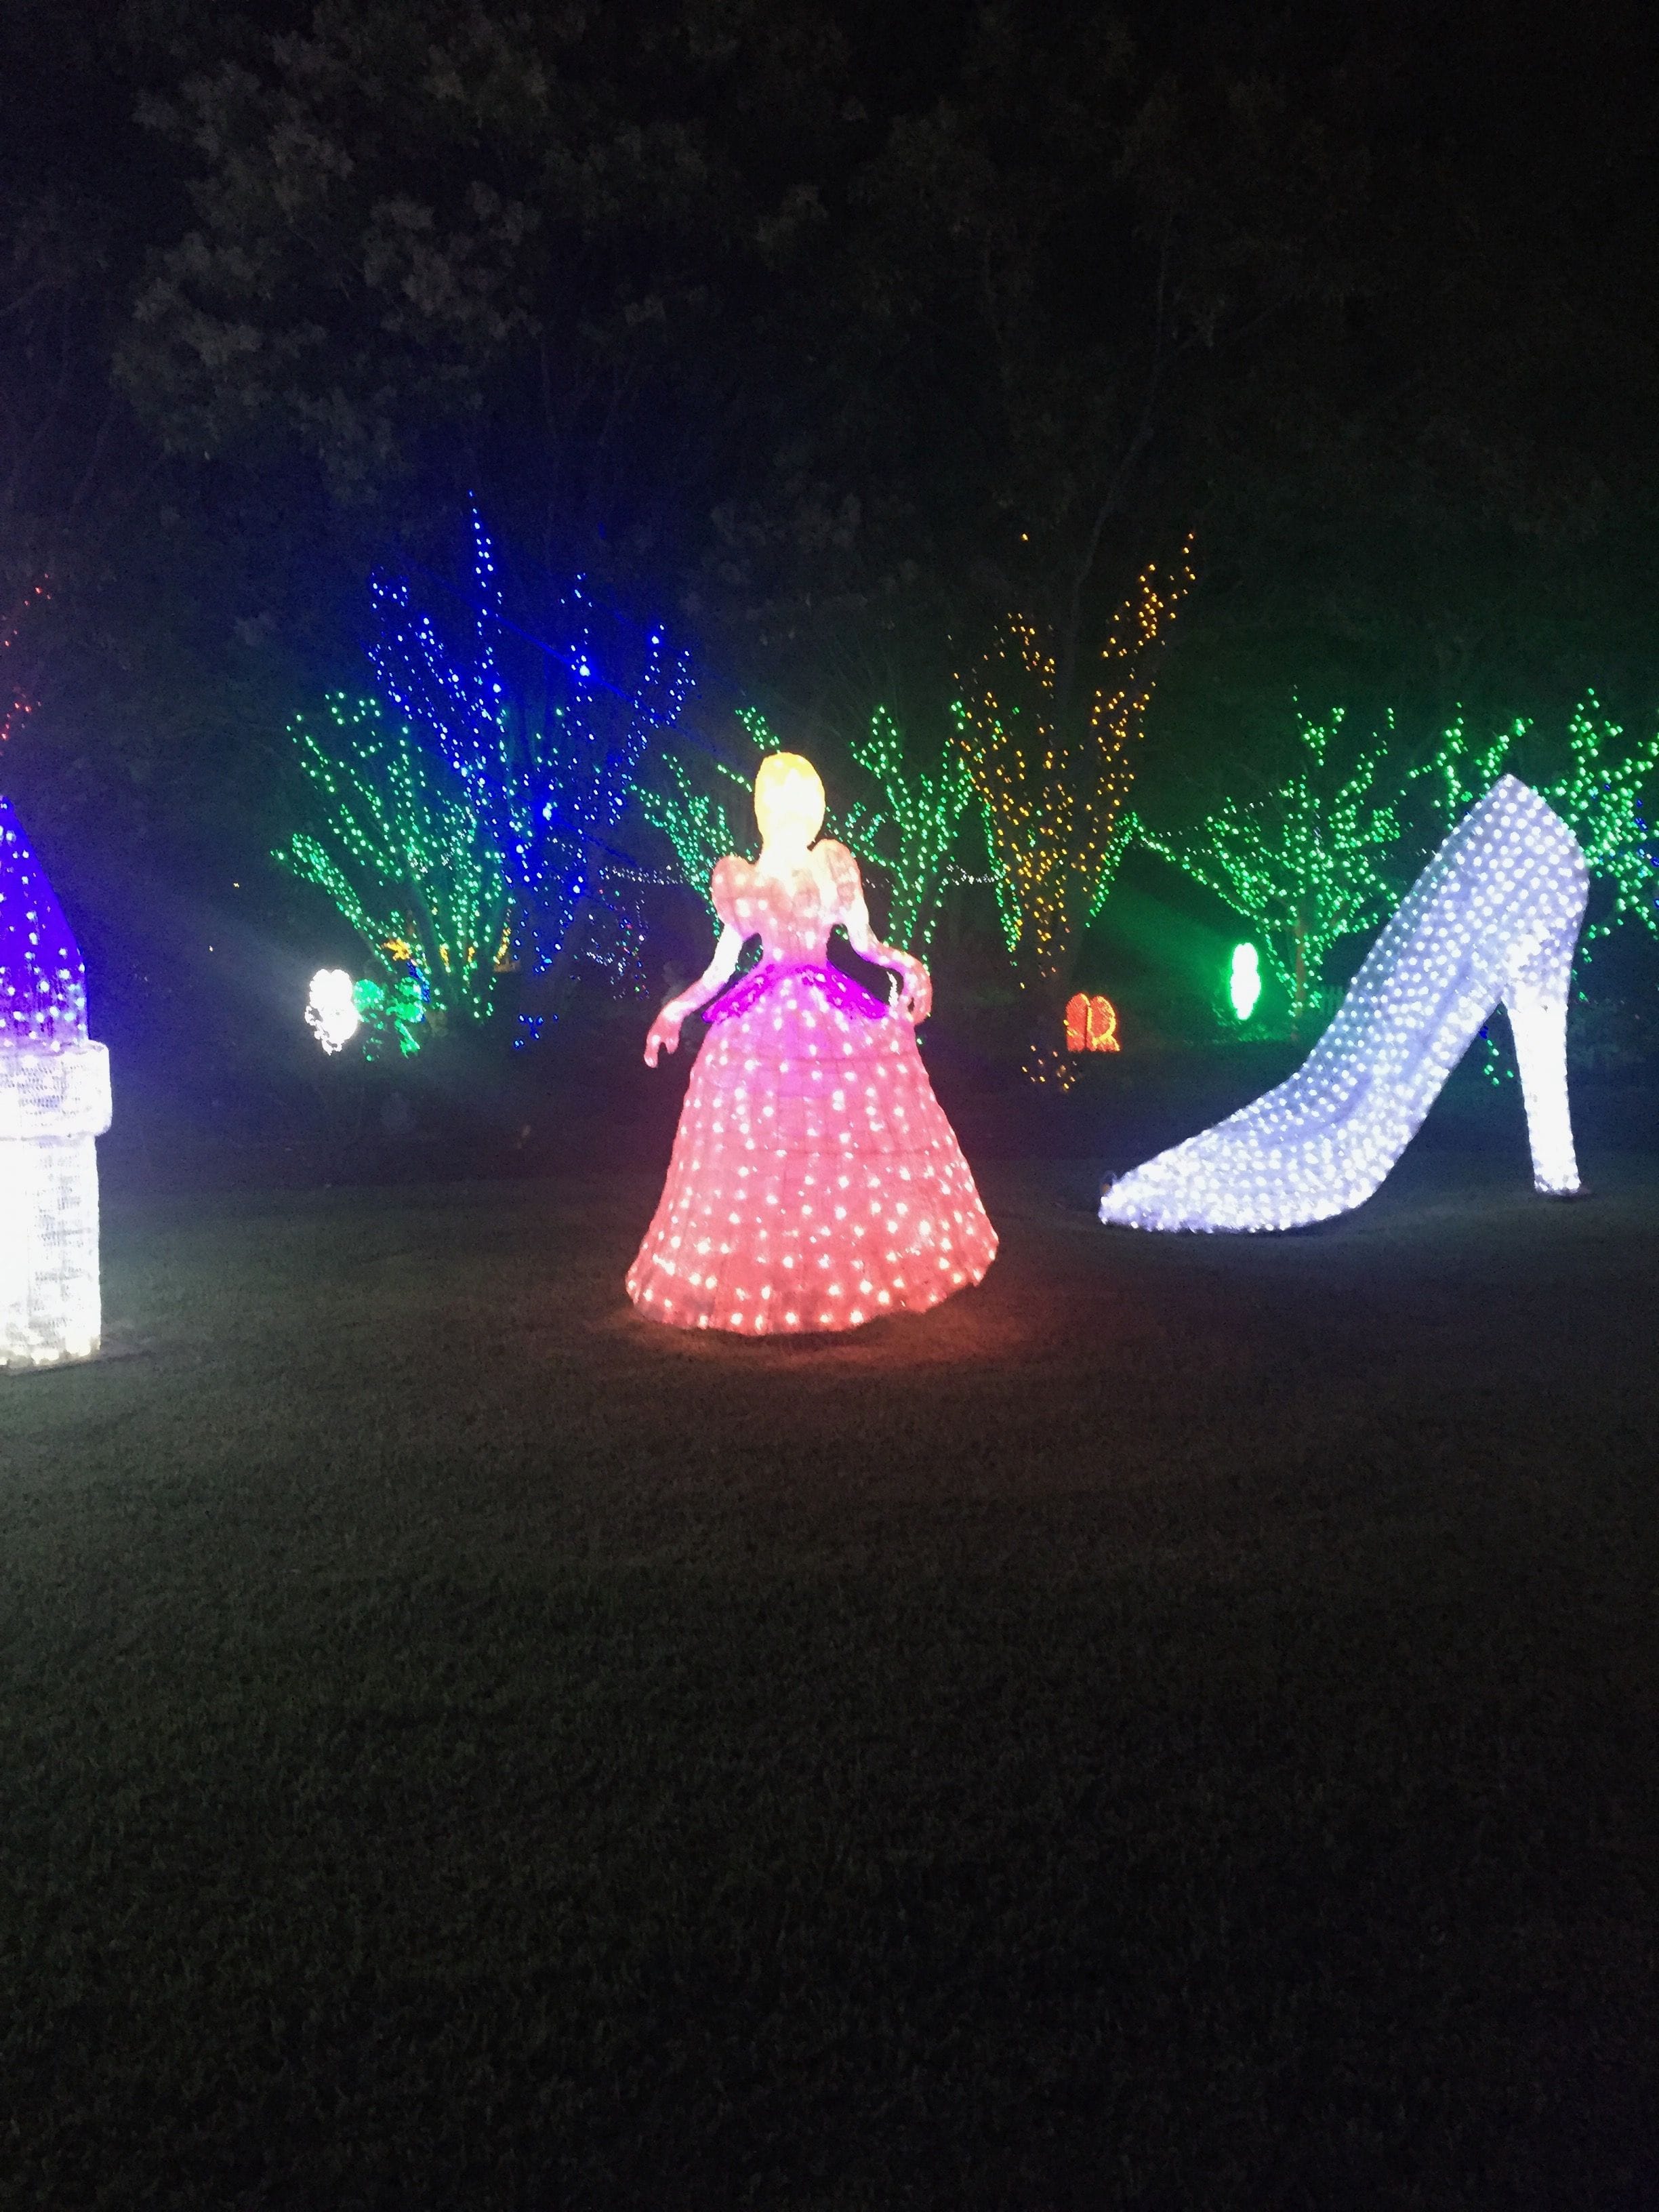 Hunter Valley Christmas Lights Spectacular Image -5b3abbe4622ef